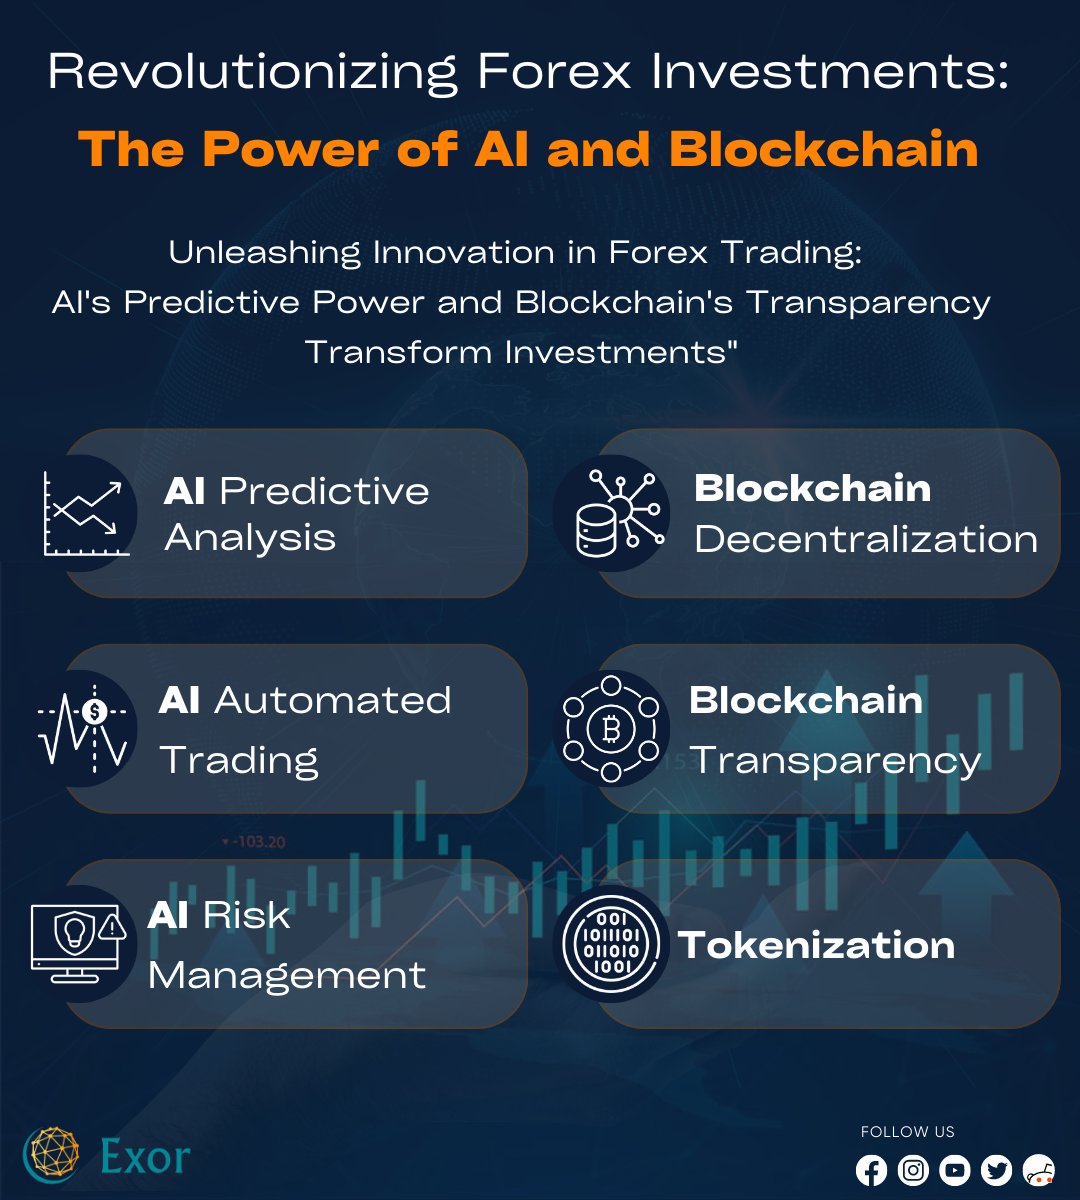 Experience the future of Forex investments with AI and blockchain technology. Unlock potential, optimize strategies, and stay ahead in the market with Exor Company. Revolutionize your trading journey. 

#ForexInvestments #AIandBlockchain #ExorCompany